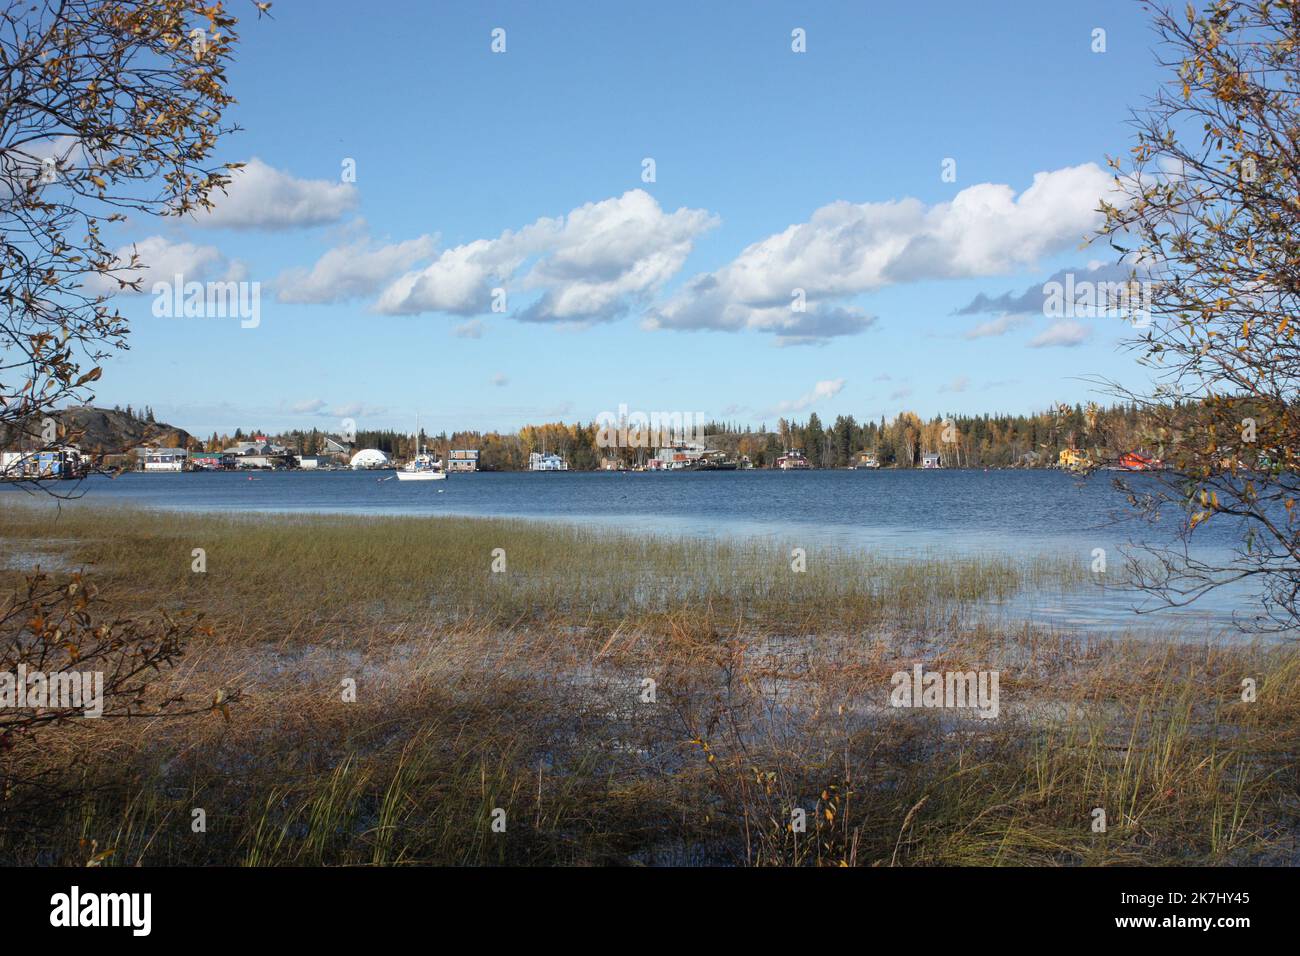 Houseboats on the Great Slave Lake, Yellowknife, Northwest Territories, Canada Stock Photo